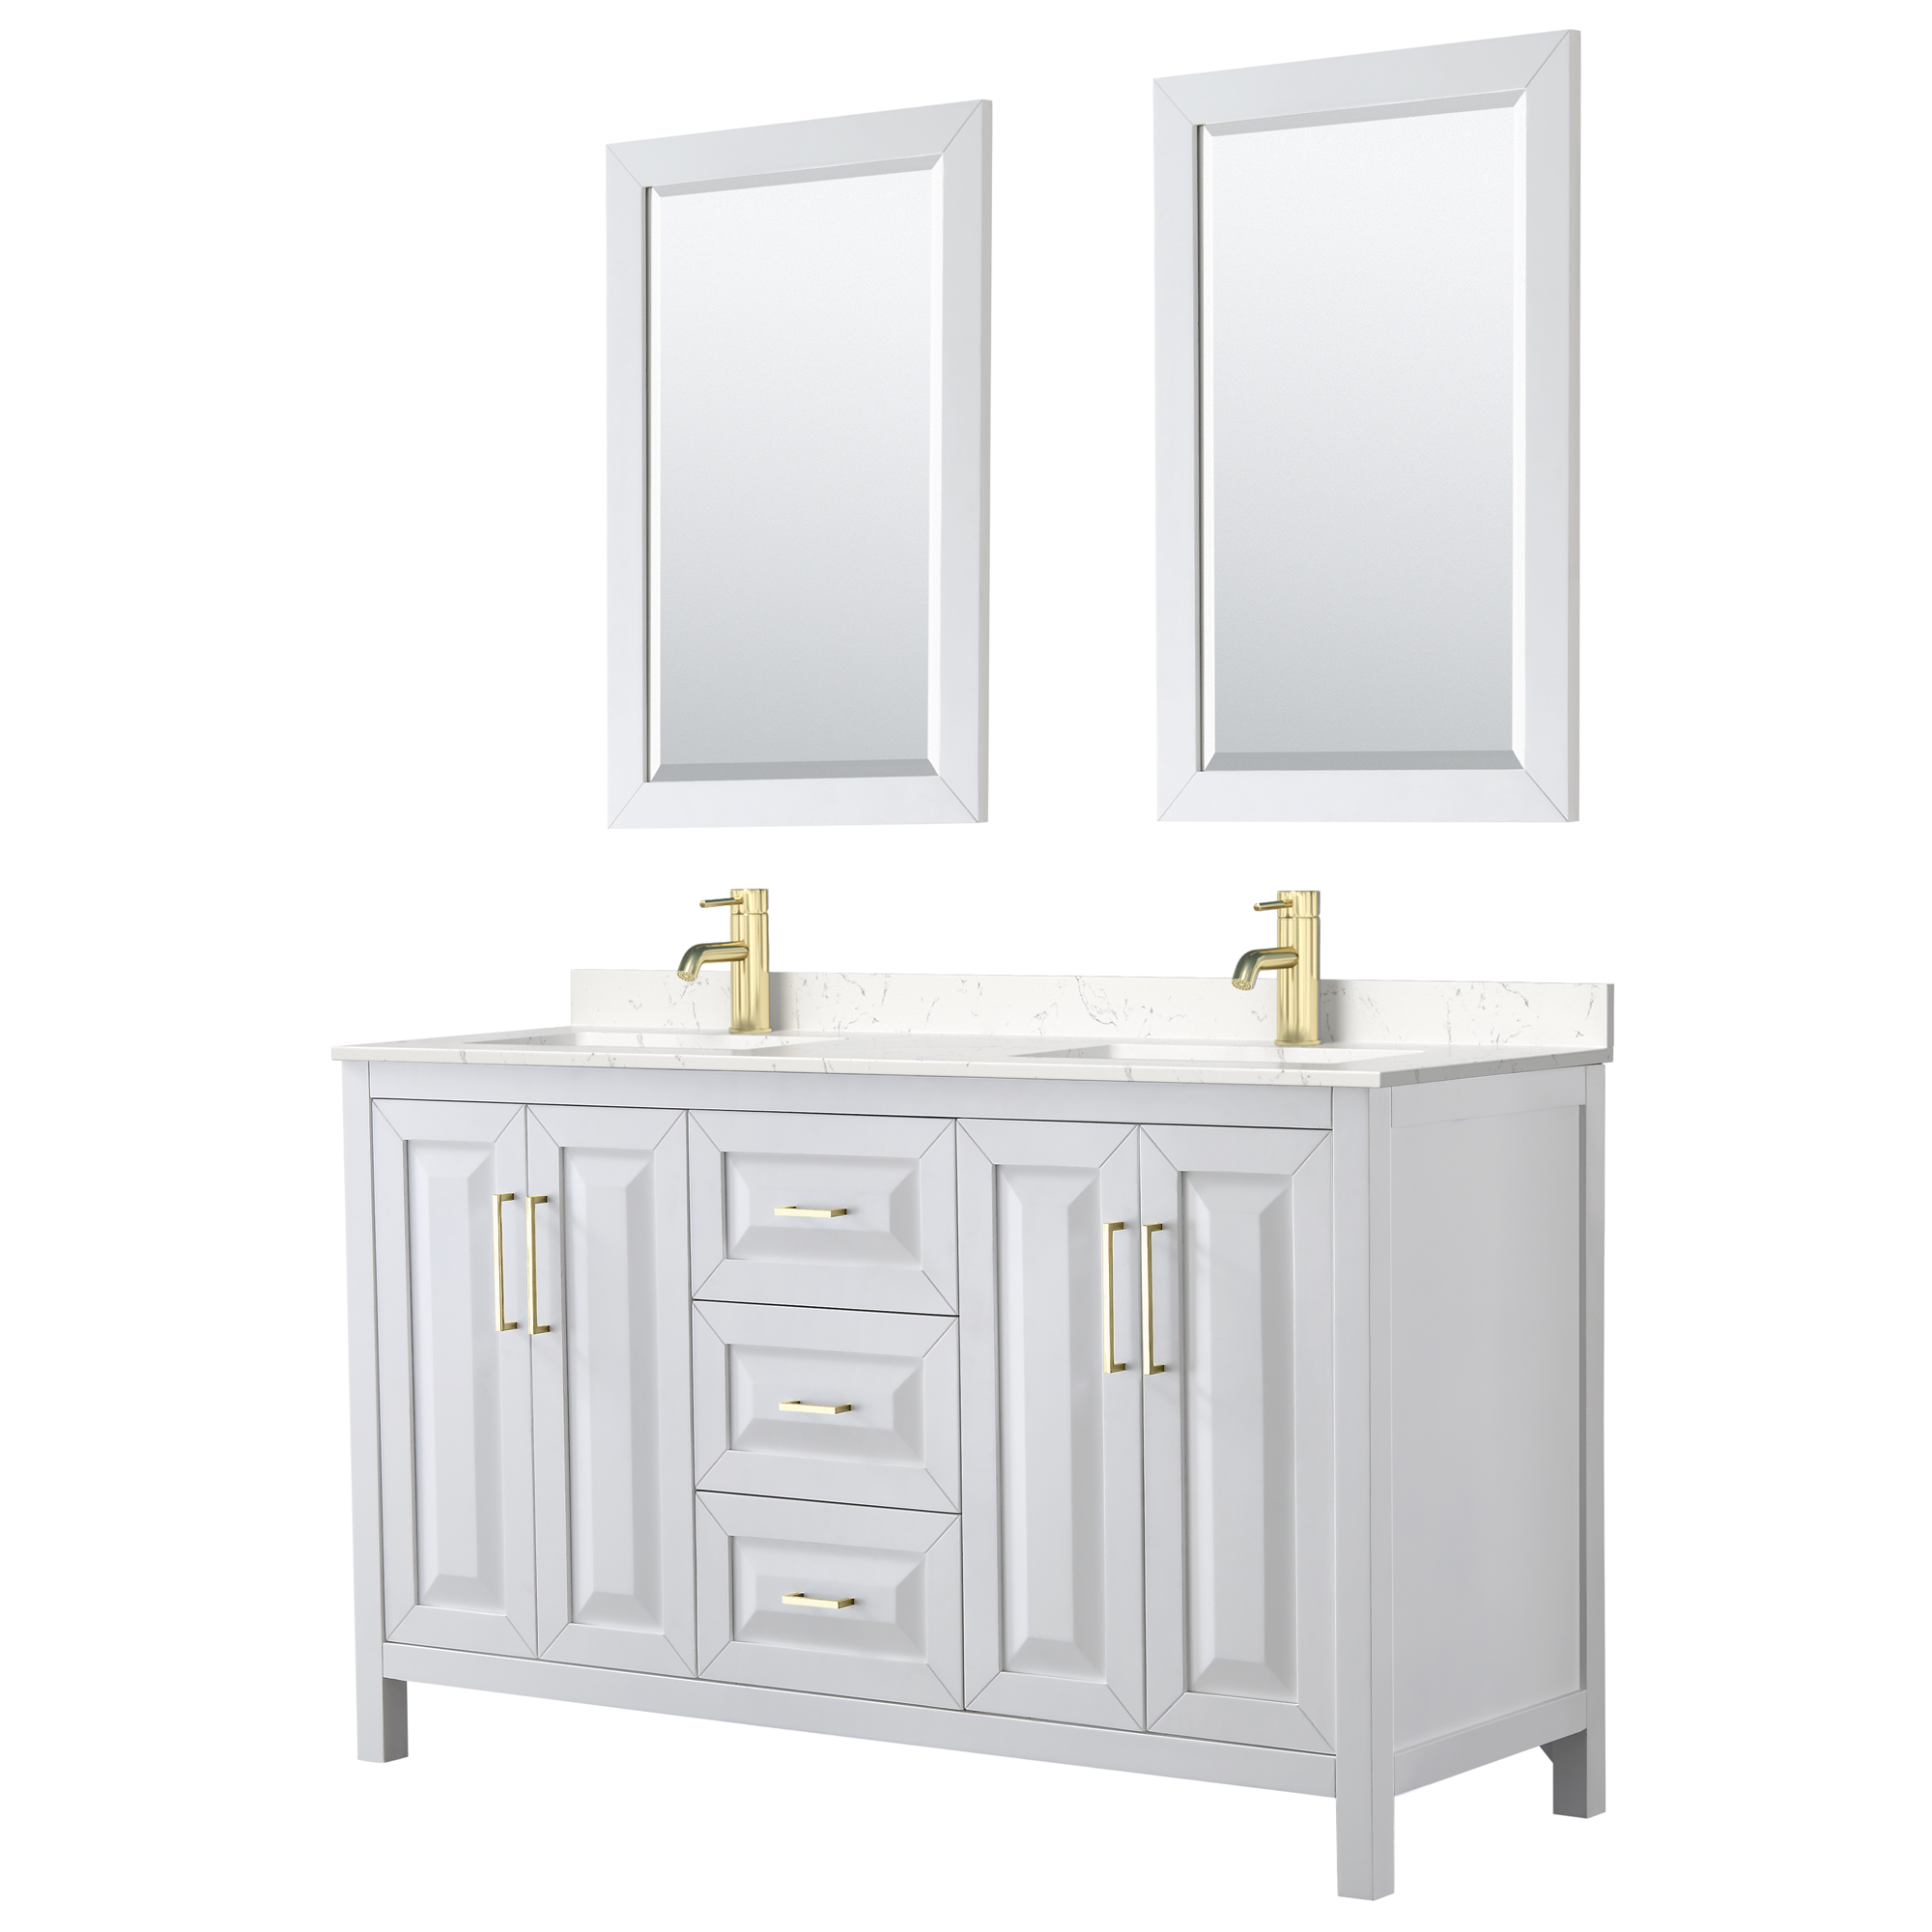 daria 60" double bathroom vanity by wyndham collection - white